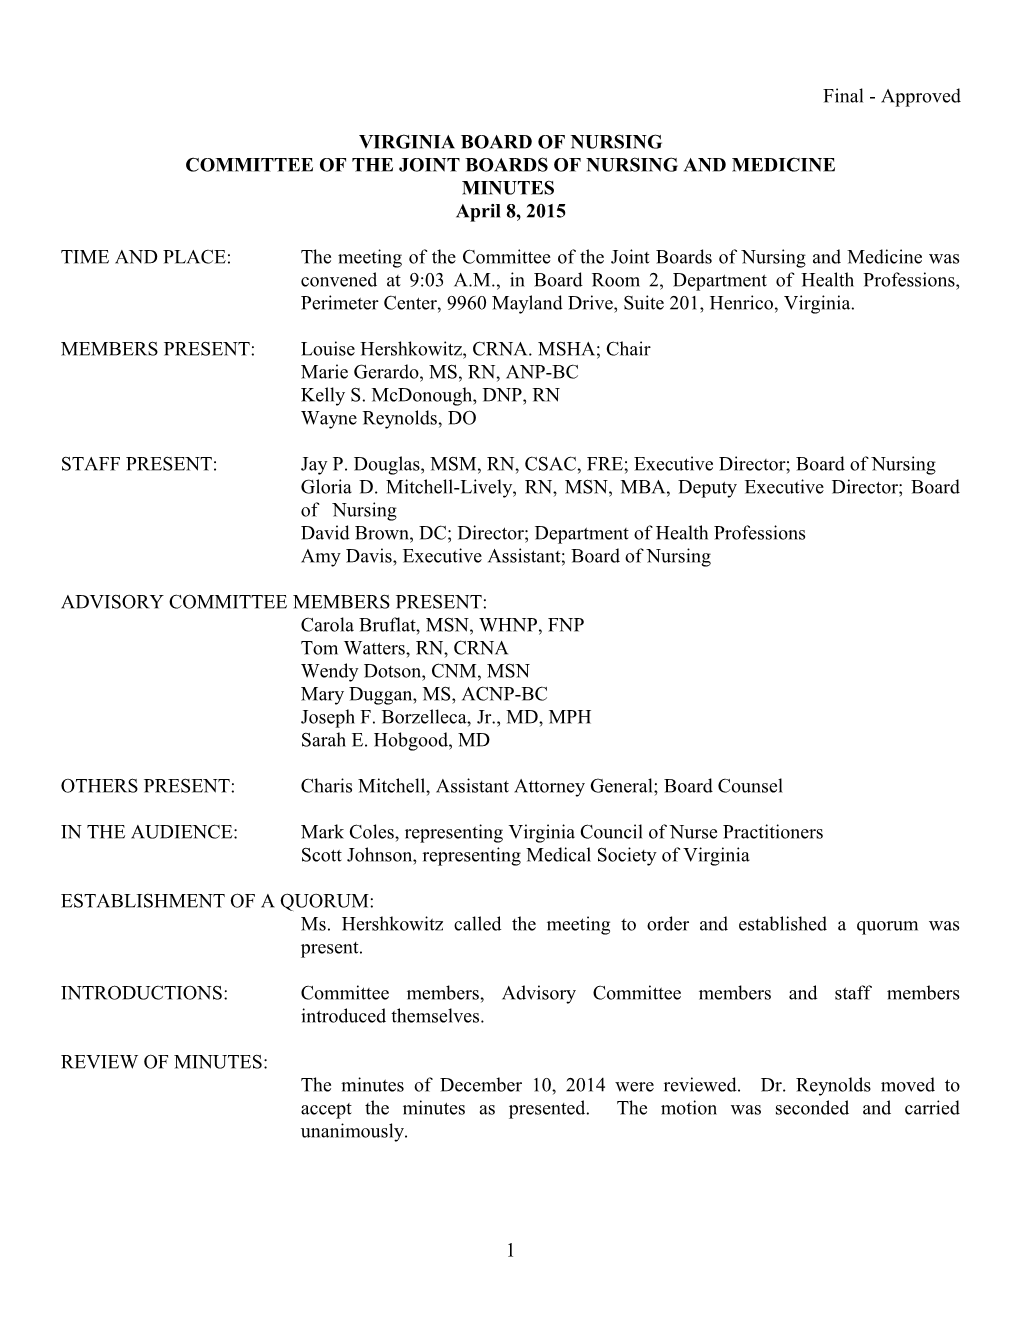 Committee of the Joint Boards of Nursing and Medicine s1